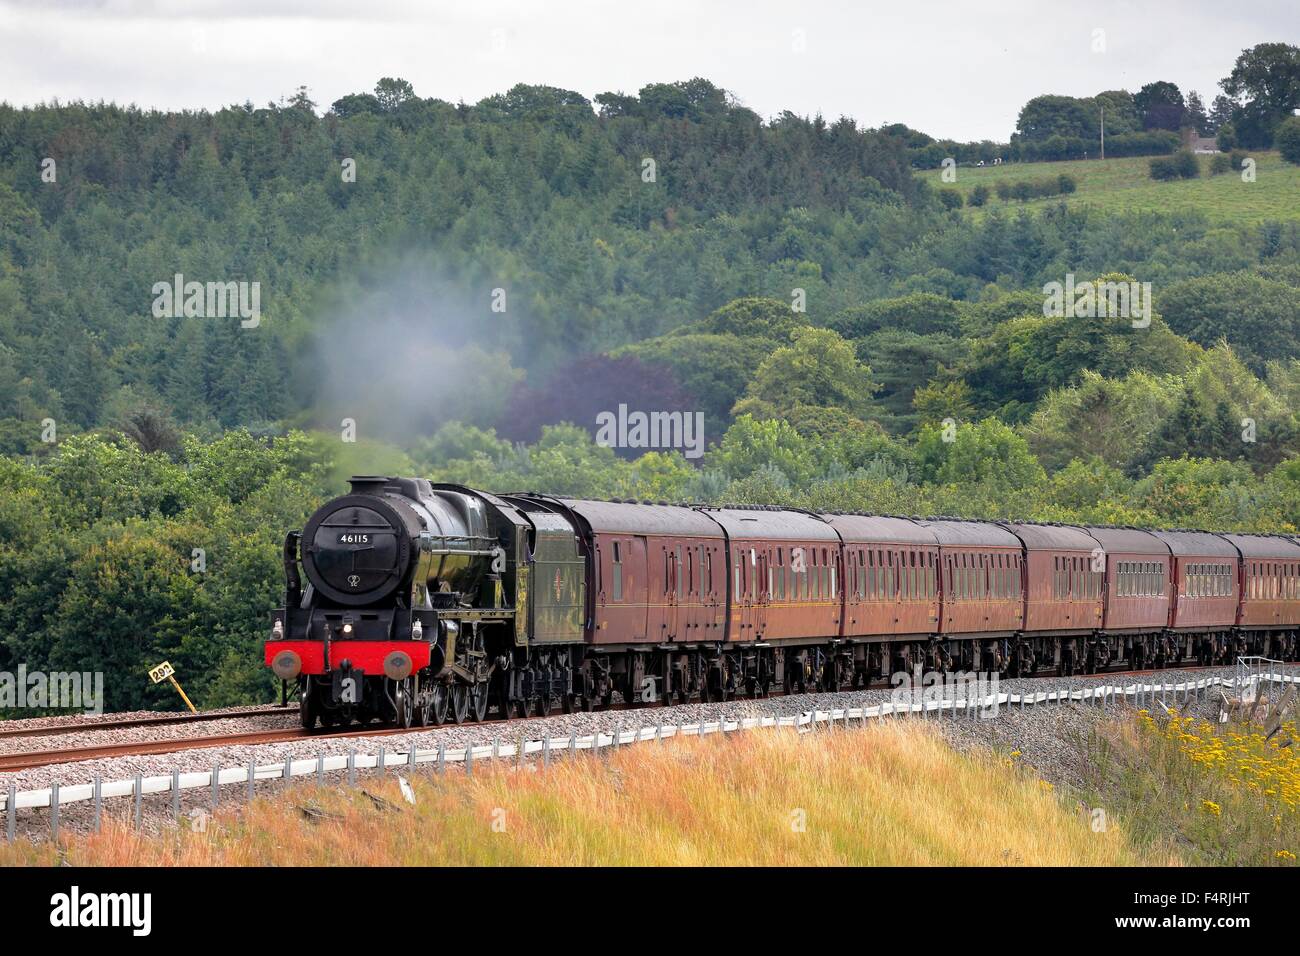 Steam train LMS Royal Scot Class 46115 Scots Guardsman on the Settle to Carlisle Railway Line near Lazonby, Eden Valley, UK. Stock Photo